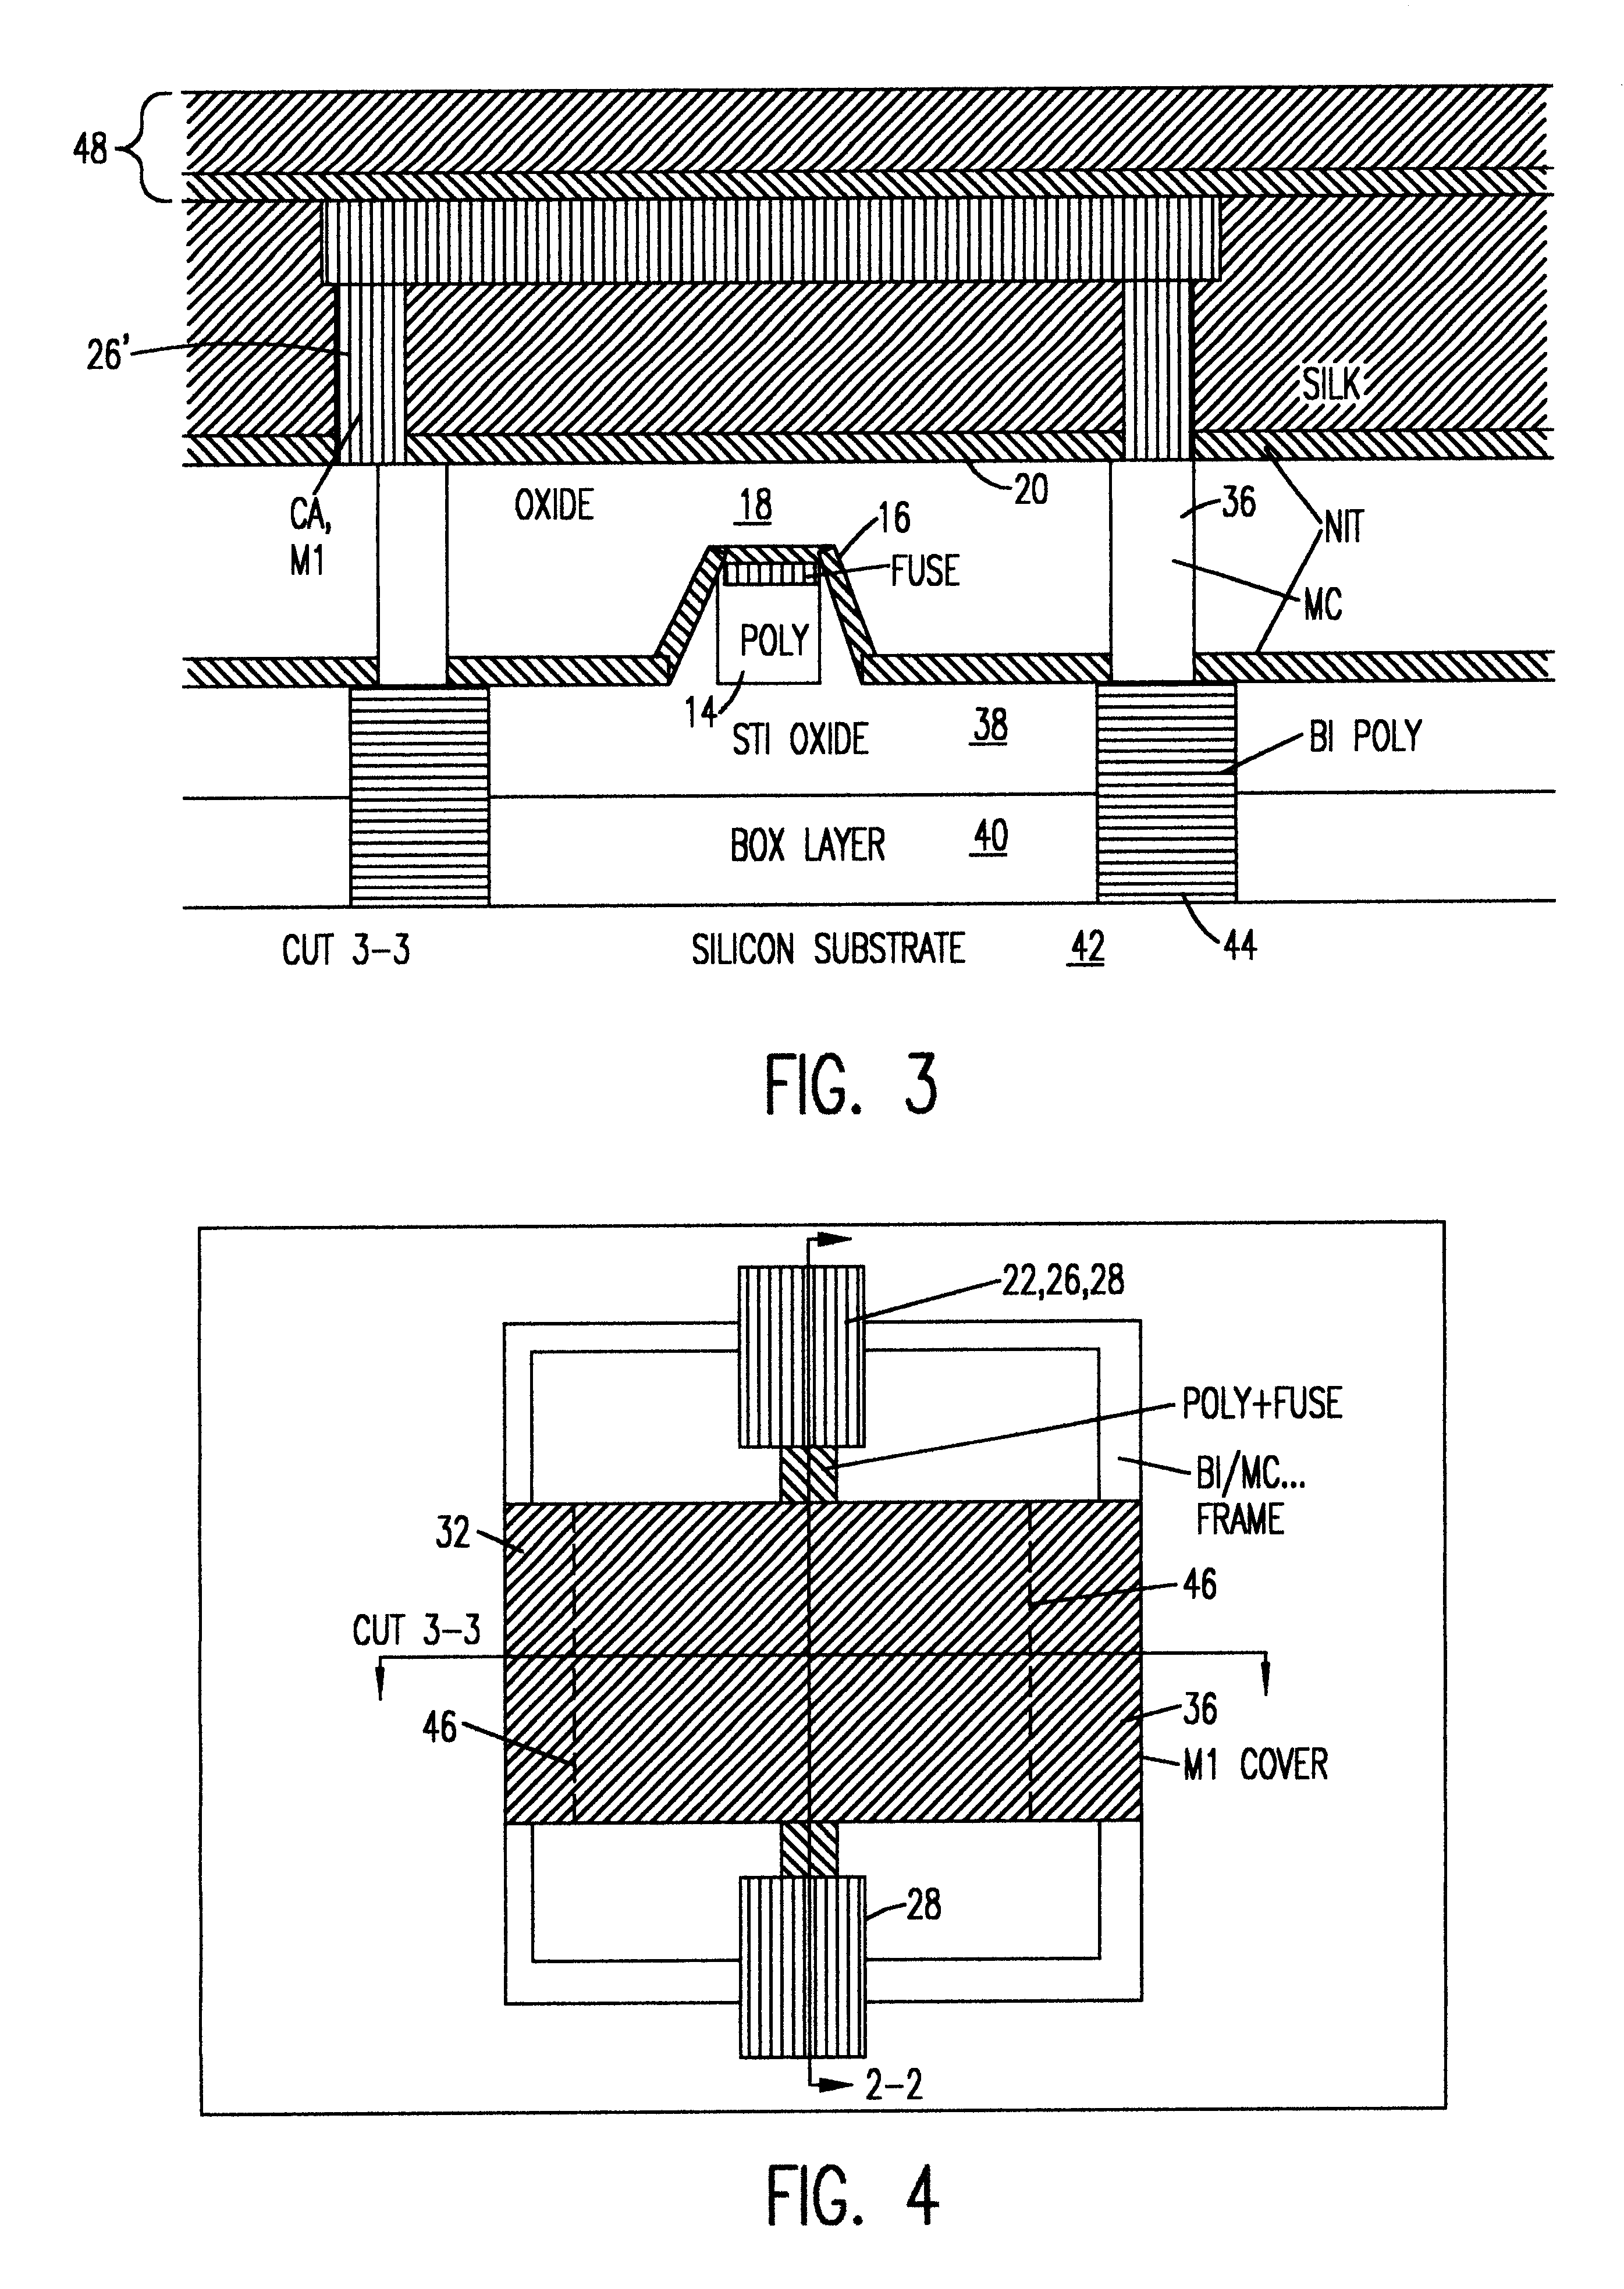 Fuse structure with thermal and crack-stop protection